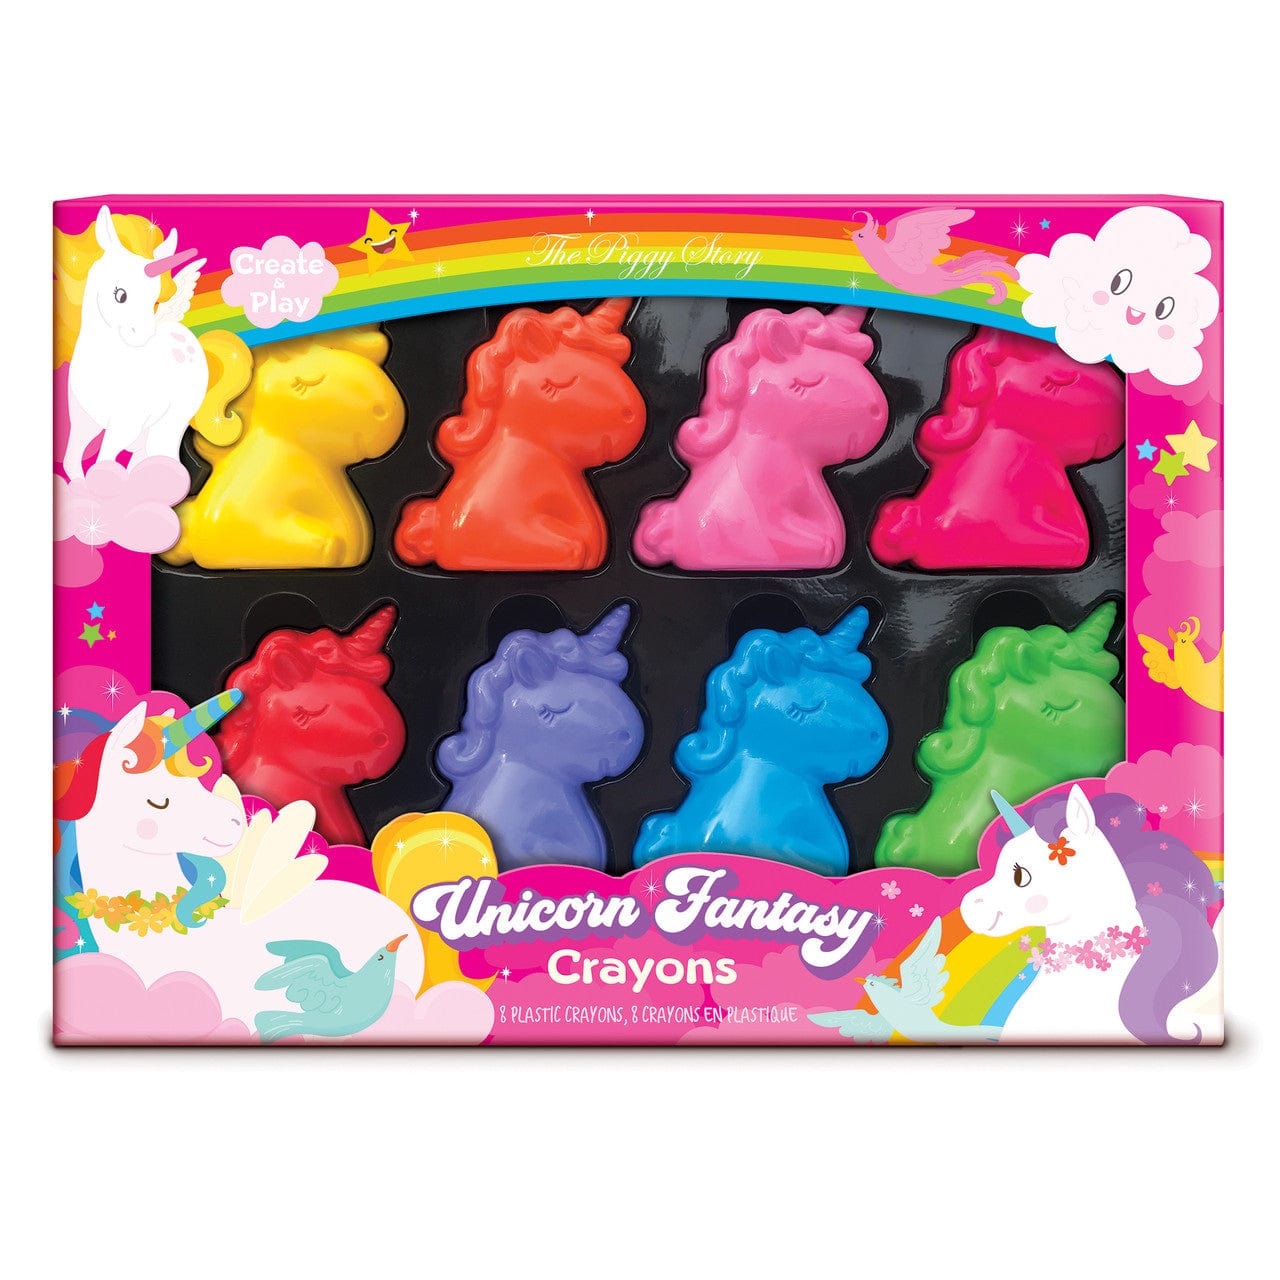 eight crayons shaped like unicorns different colors